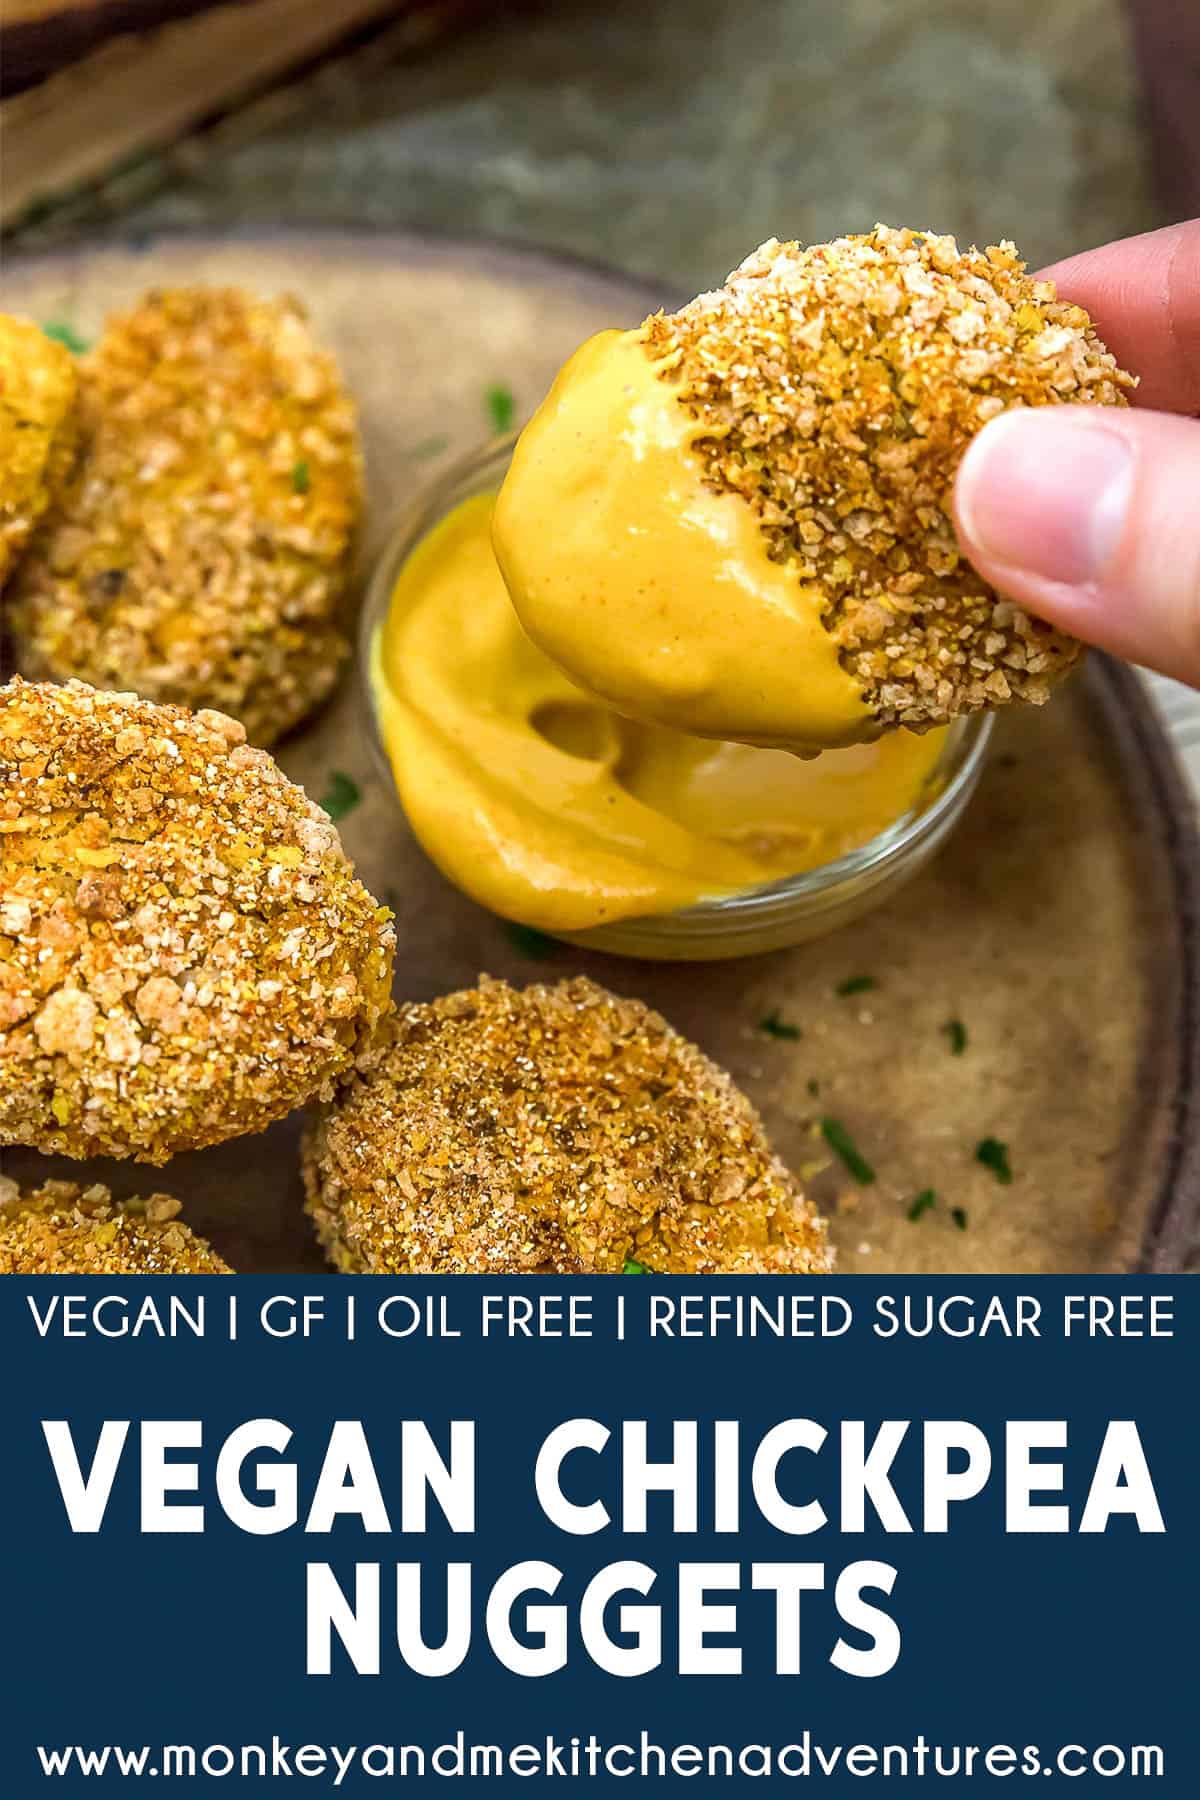 Vegan Chickpea Nuggets with text description